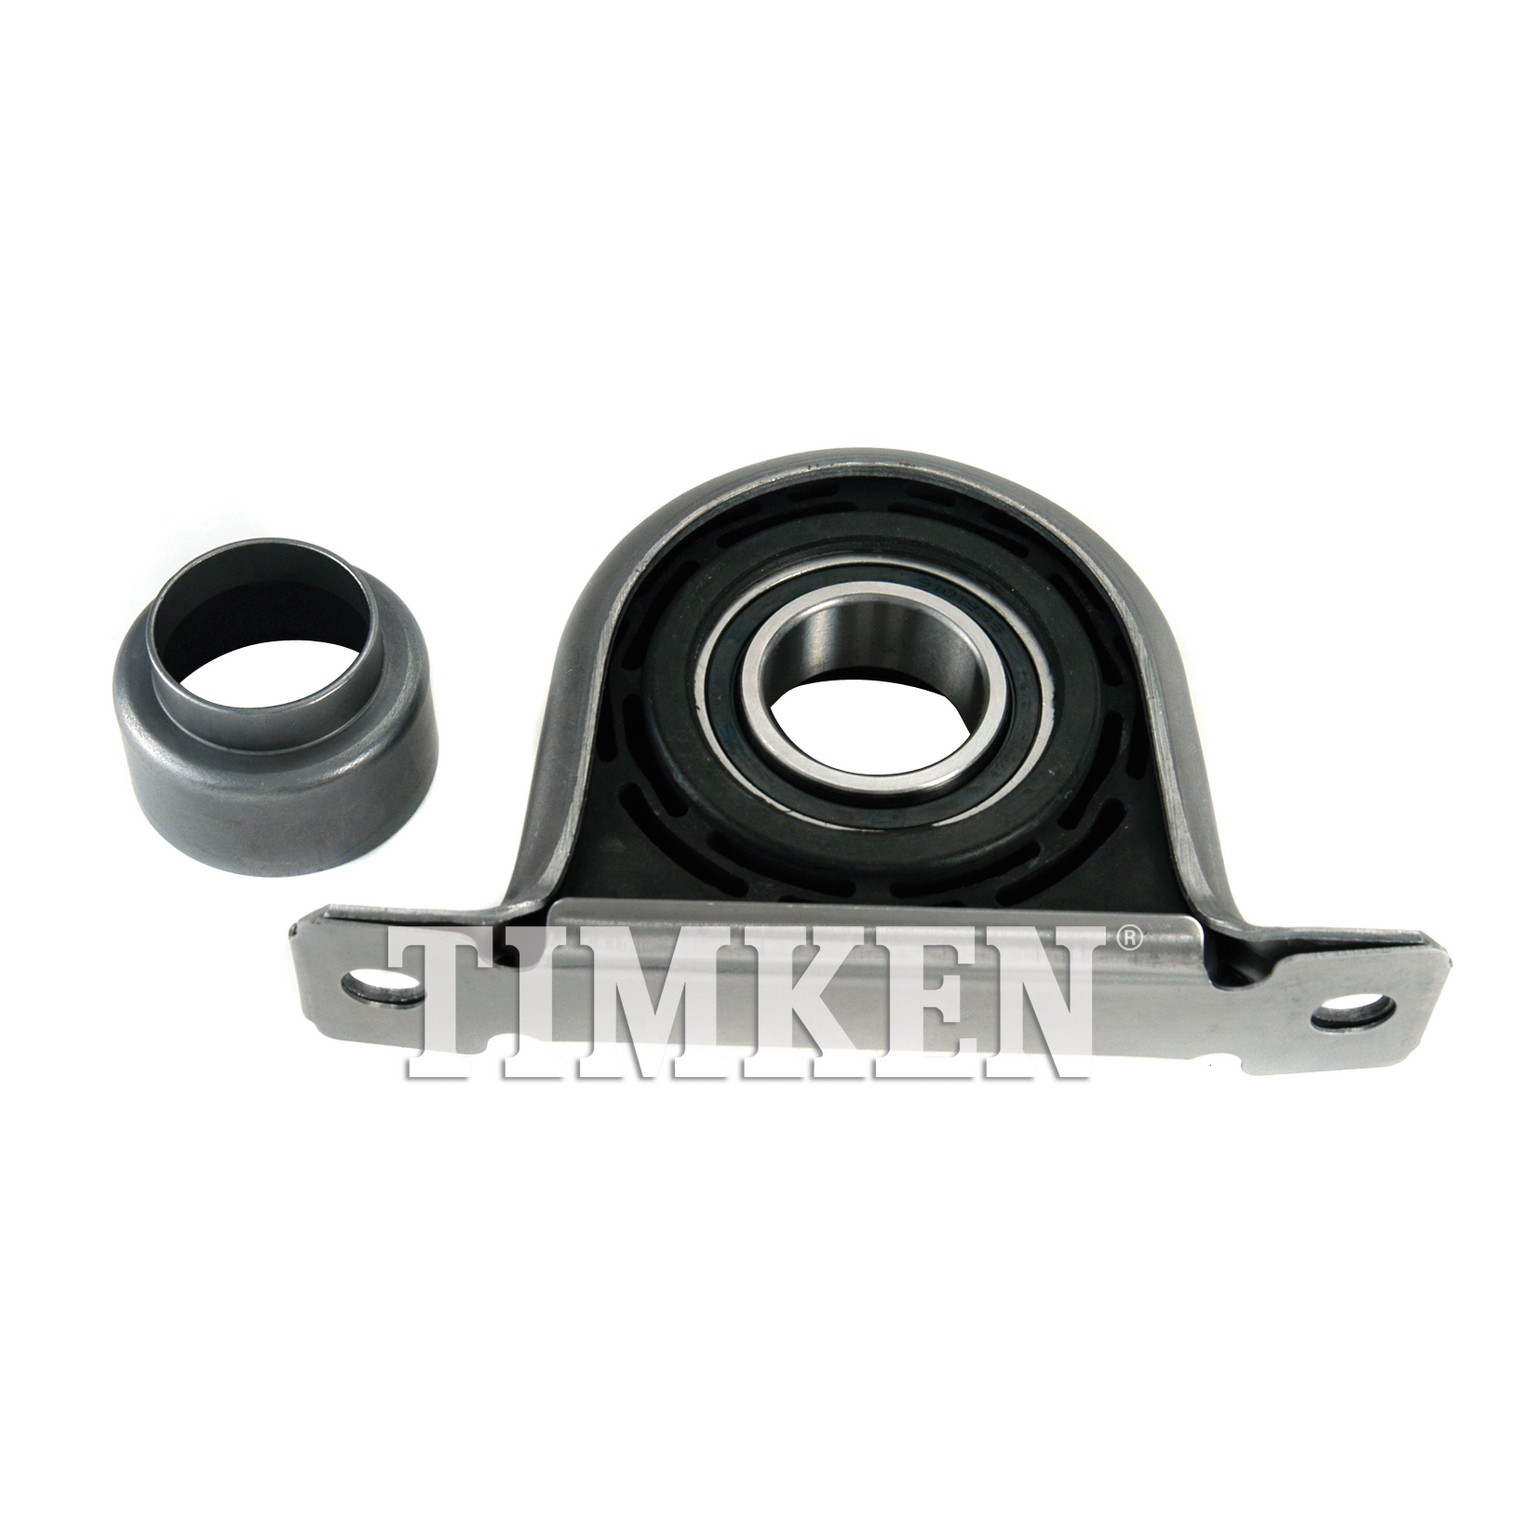 Bearing support. Drive shaft Center support bearing. Supporting bearing-Top.